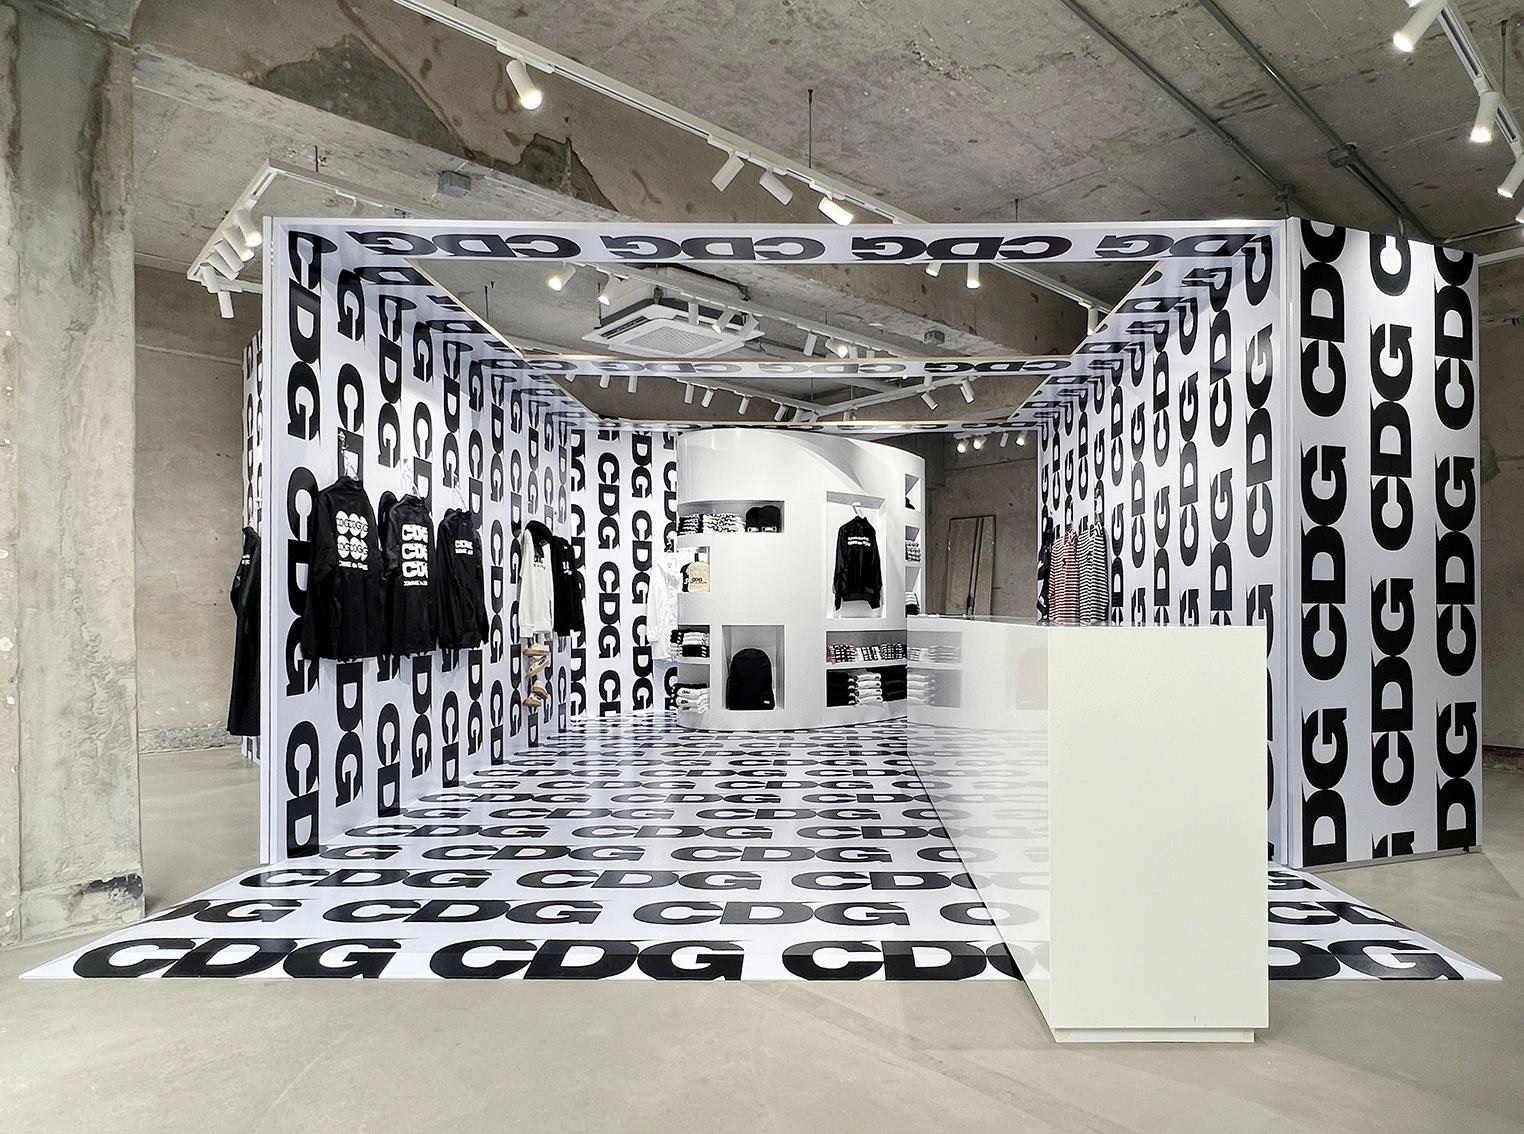 The interior of the CDGCDGCDG pop-up store is filled with the famous logo.